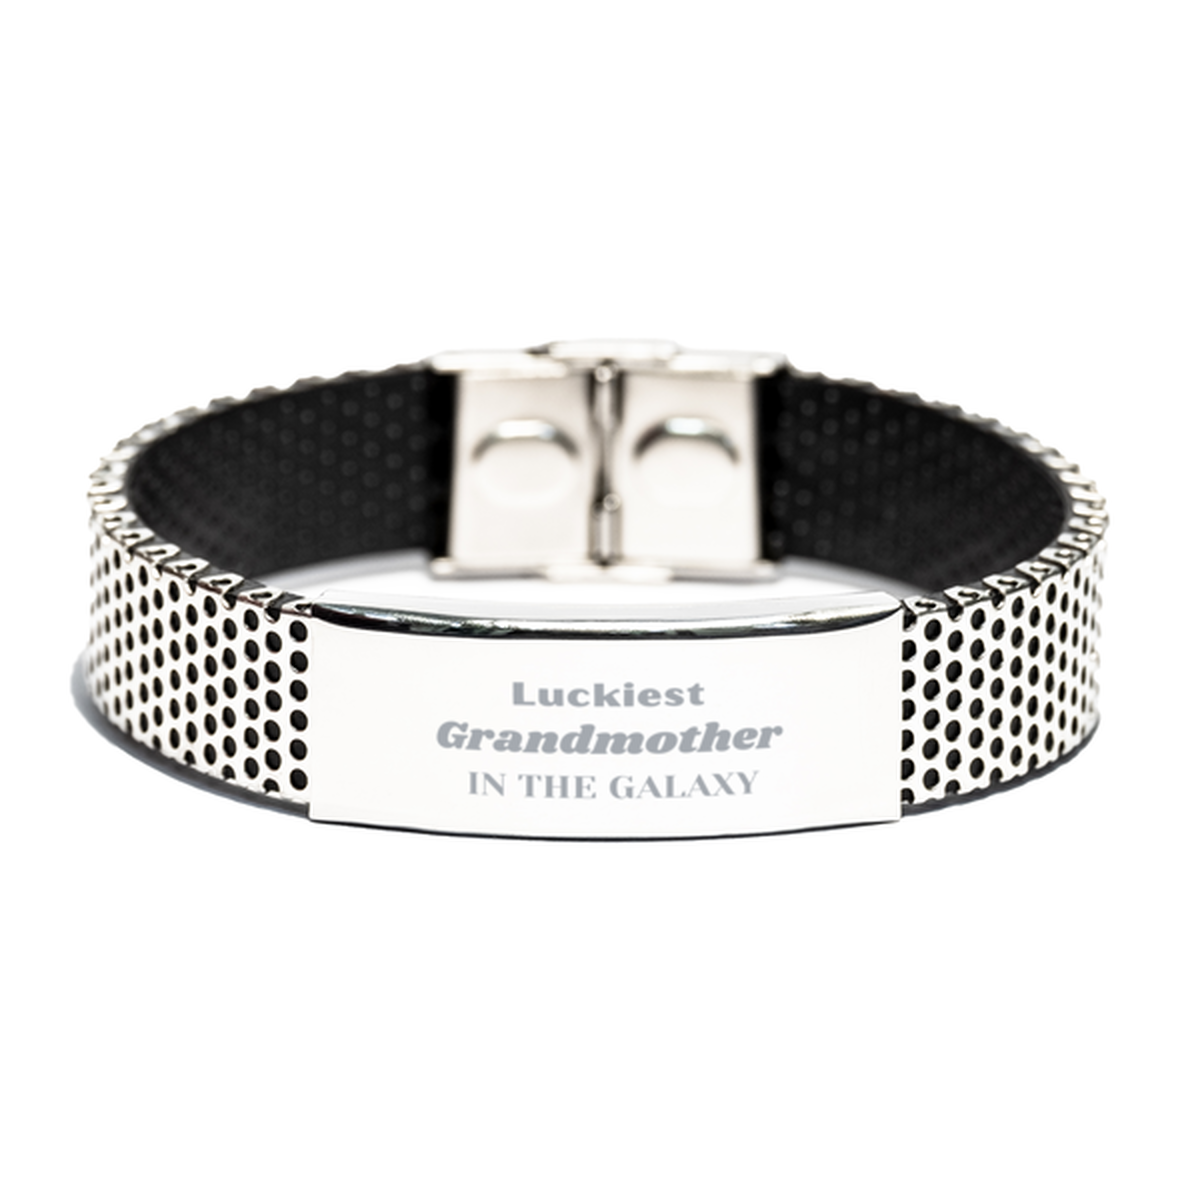 Luckiest Grandmother in the Galaxy, To My Grandmother Engraved Gifts, Christmas Grandmother Stainless Steel Bracelet Gifts, X-mas Birthday Unique Gifts For Grandmother Men Women